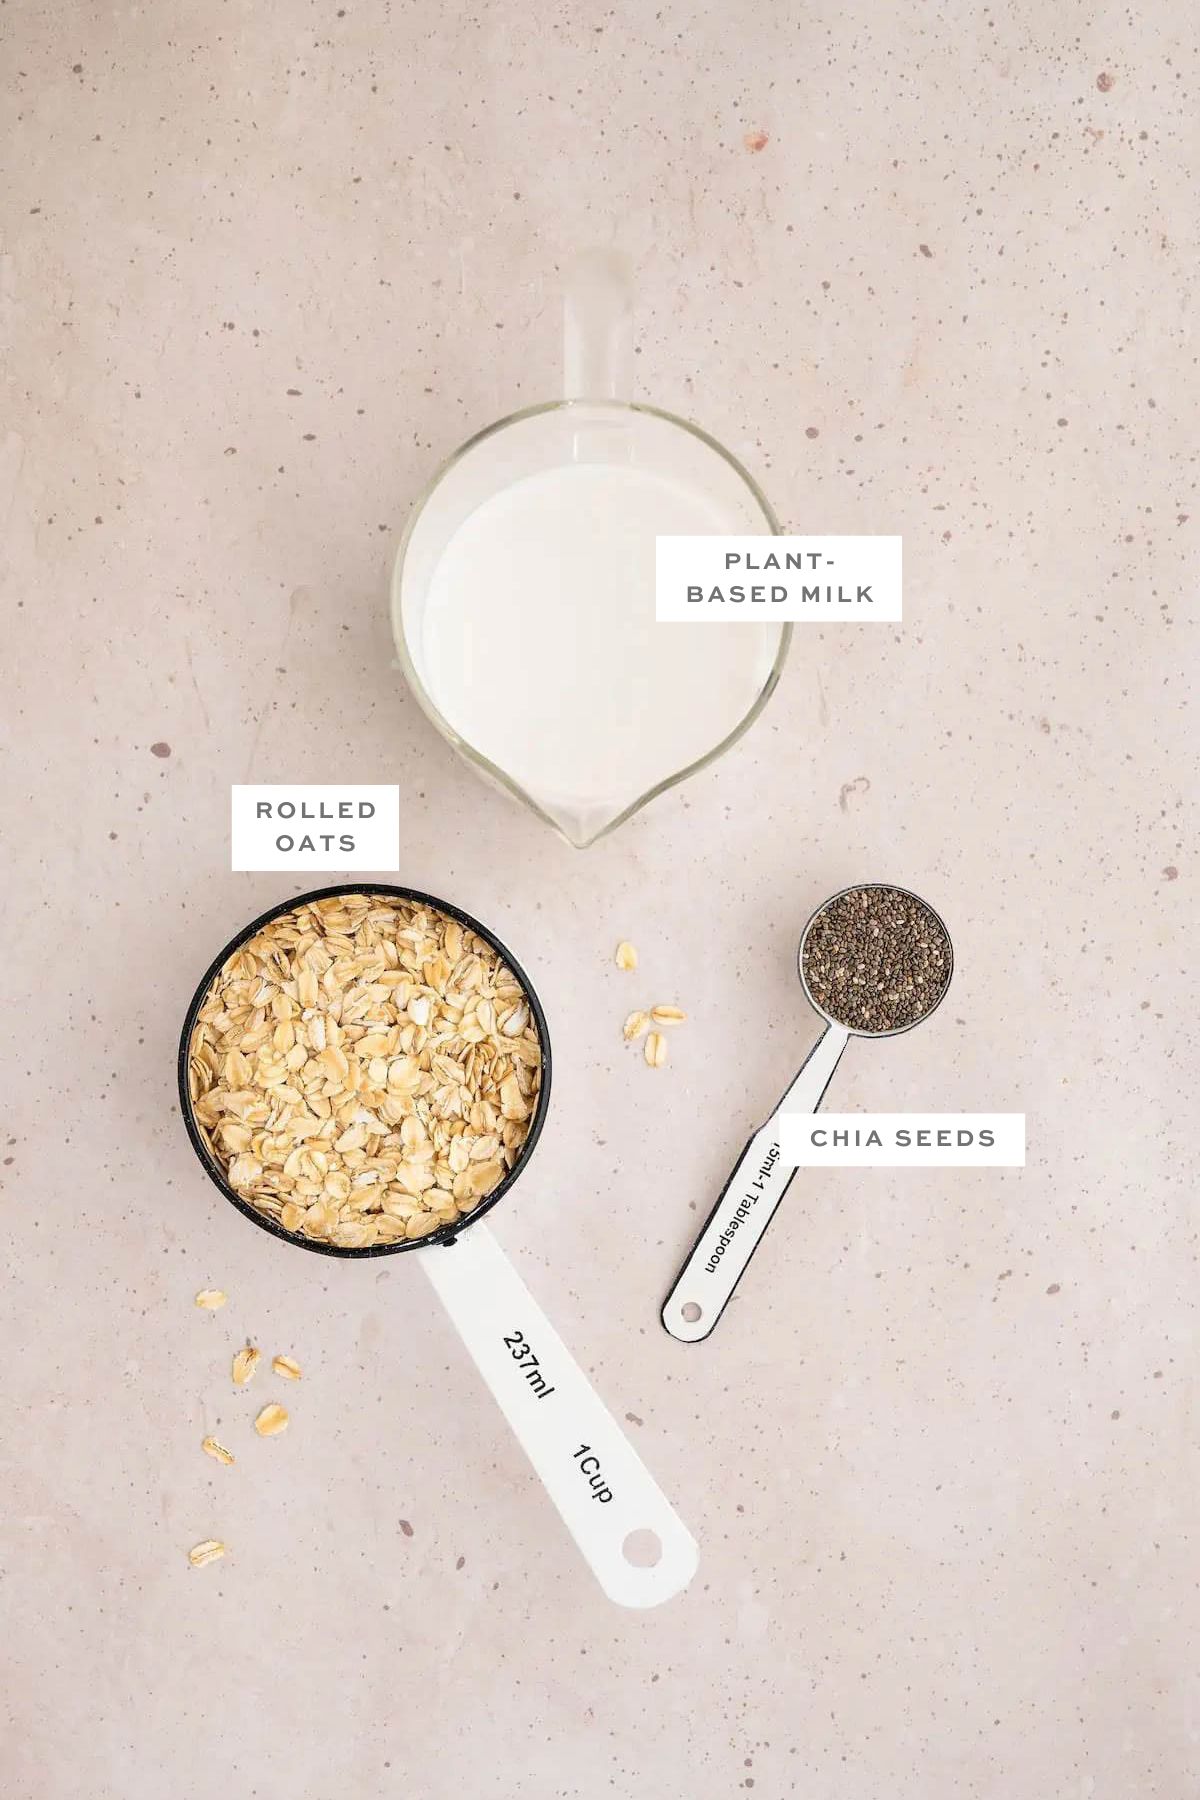 Key ingredients for overnight oats with labels.